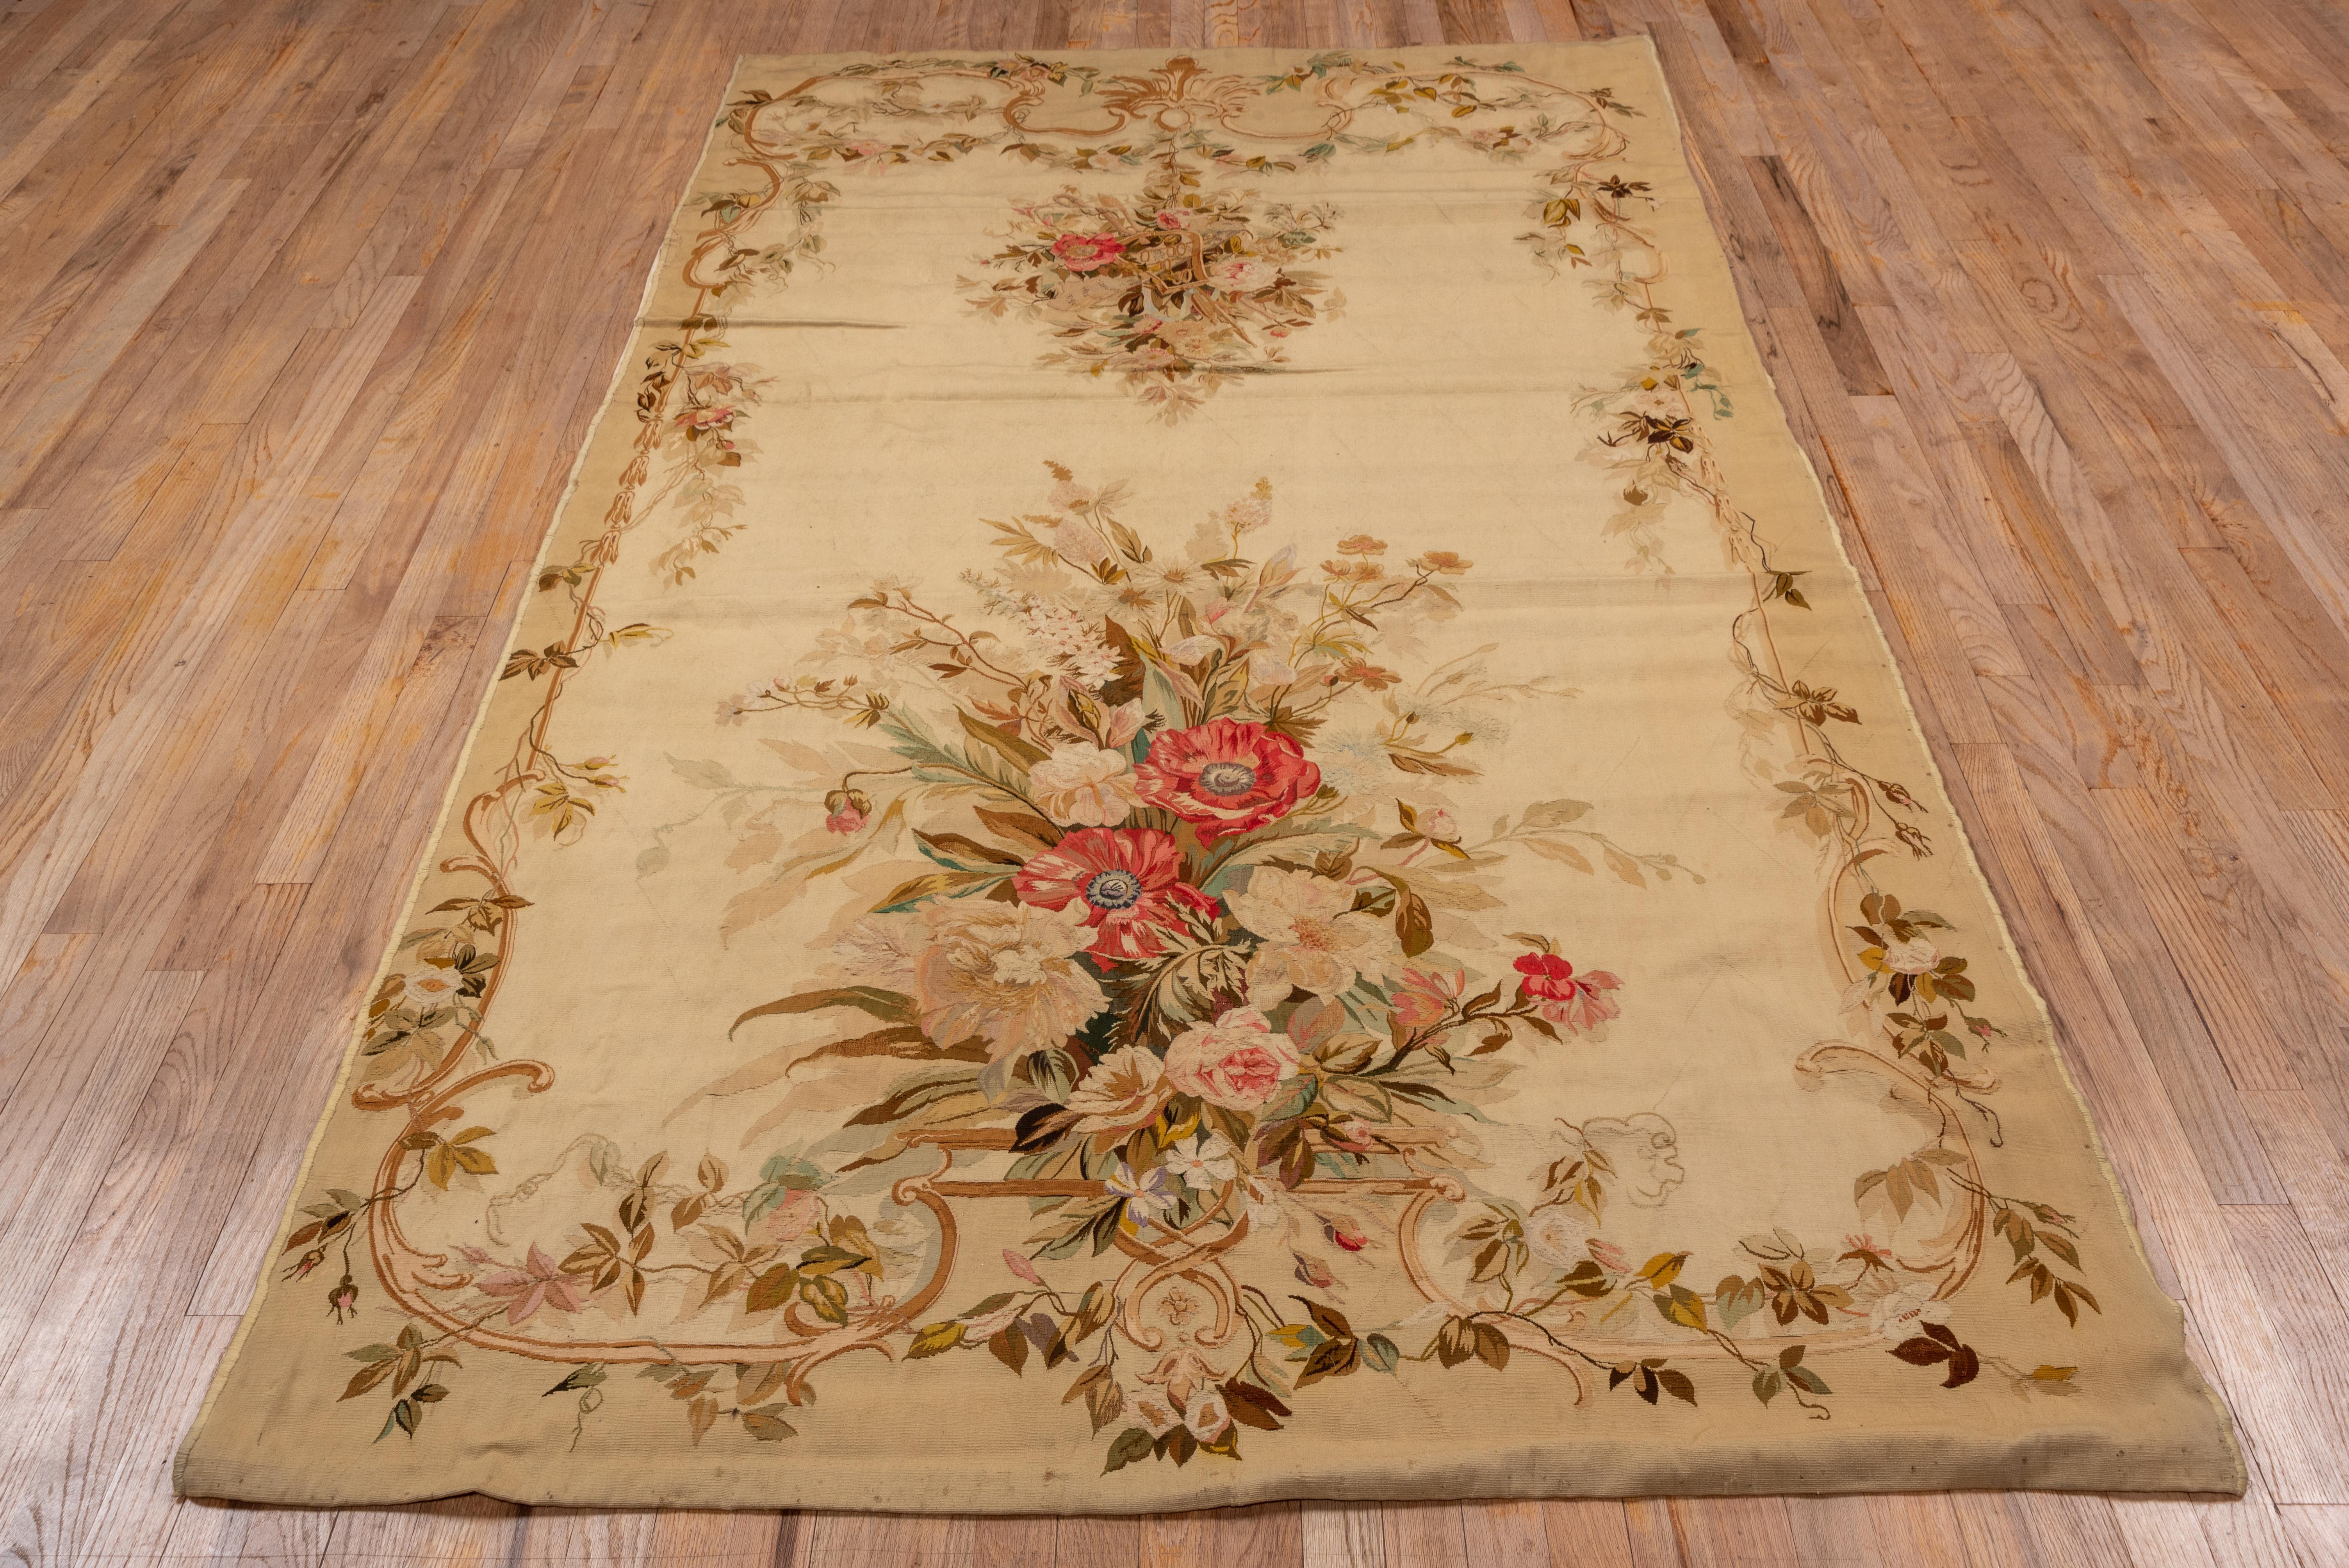 In a rare size, this tapestry-woven French antique could be used on the floor or as a wall hanging. The ivory field shows a hanging bouquet amid swags at one end and a larger rose bush at the opposite end. Narrow partial staves in the side borders.